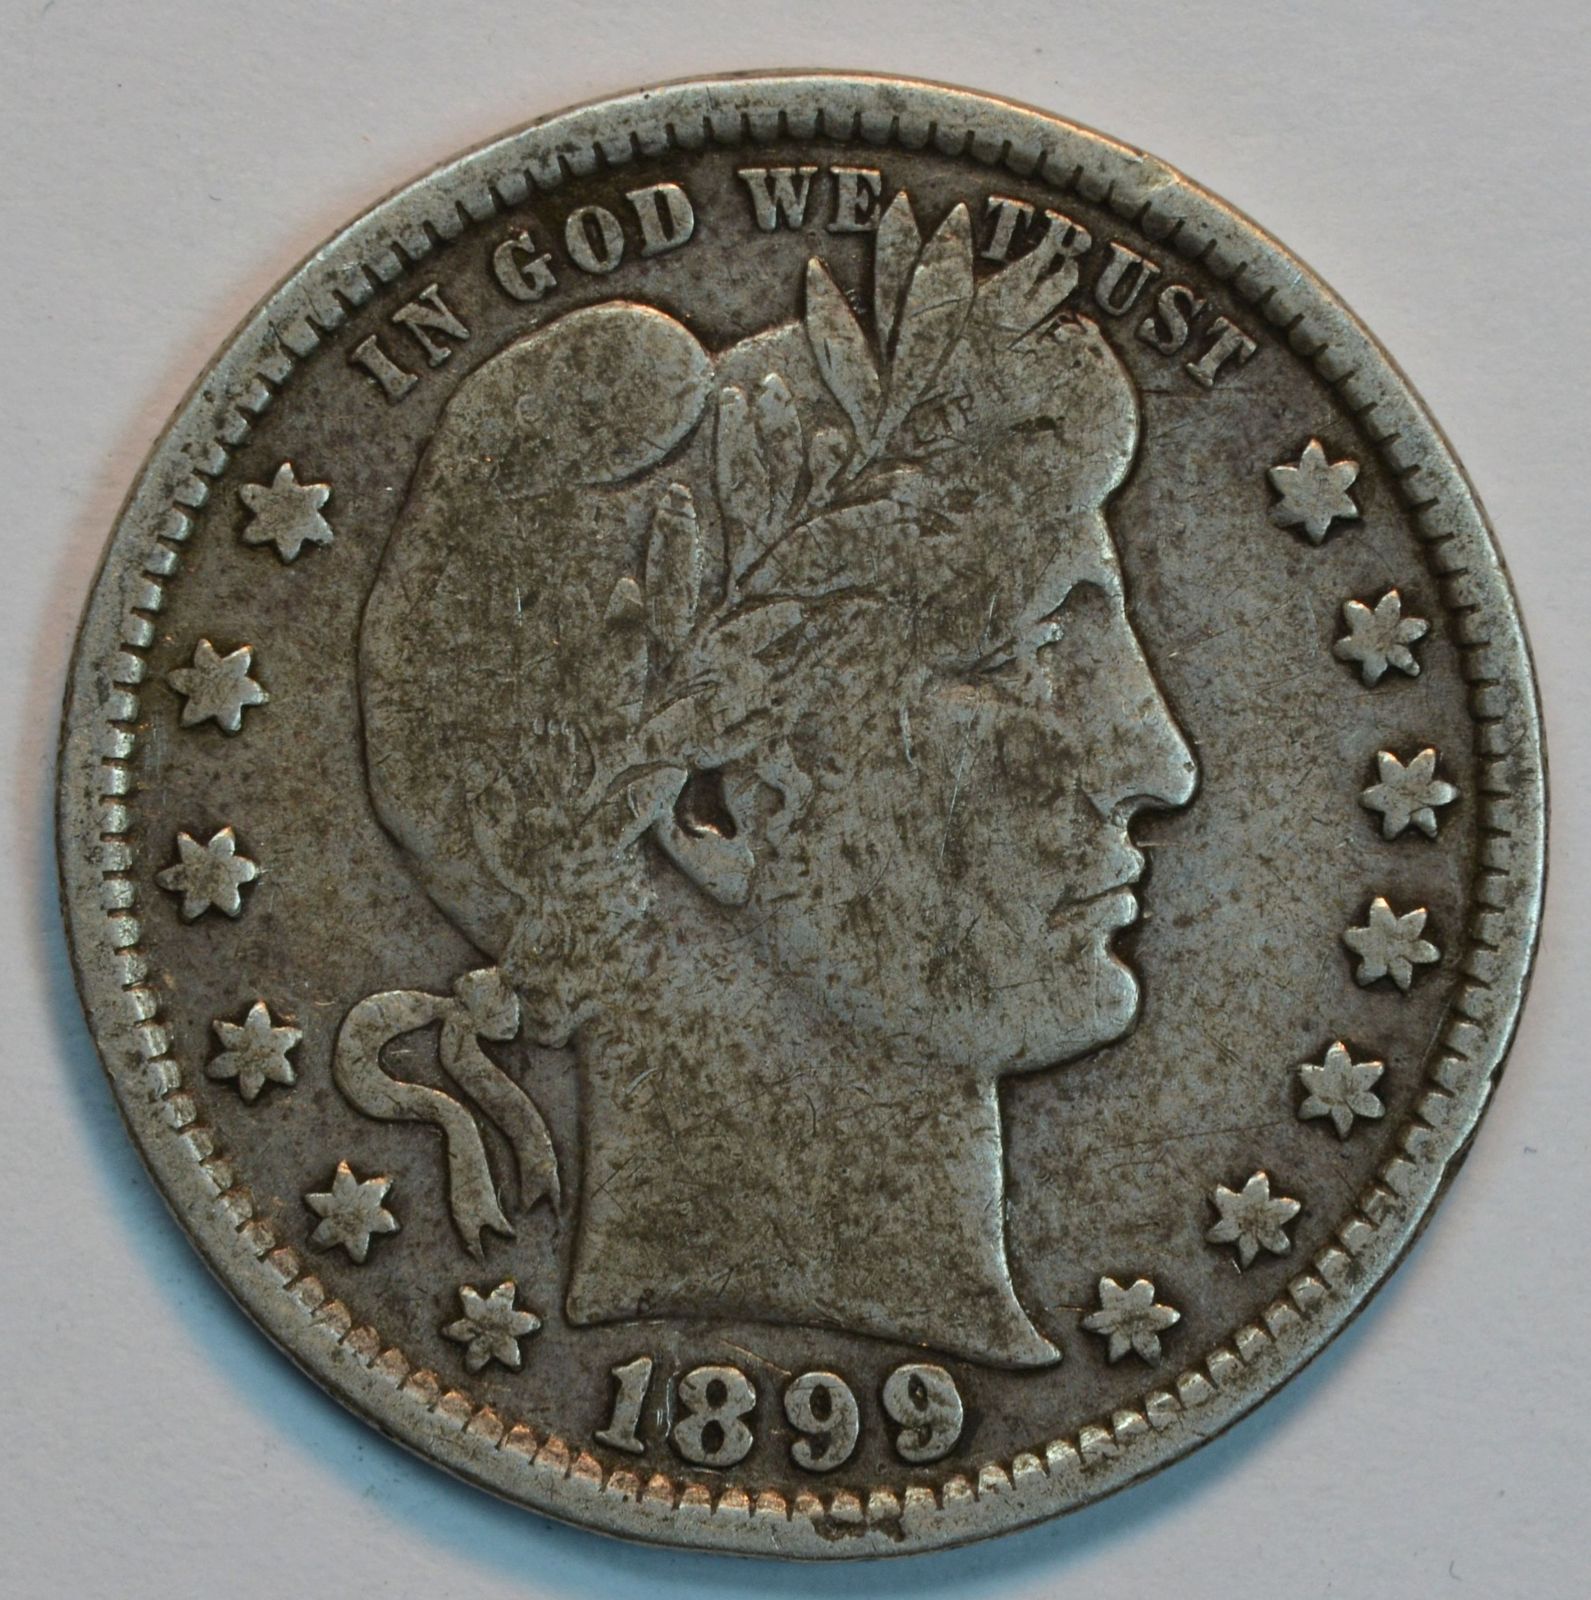 Primary image for 1899 P Barber circulated silver quarter VG details